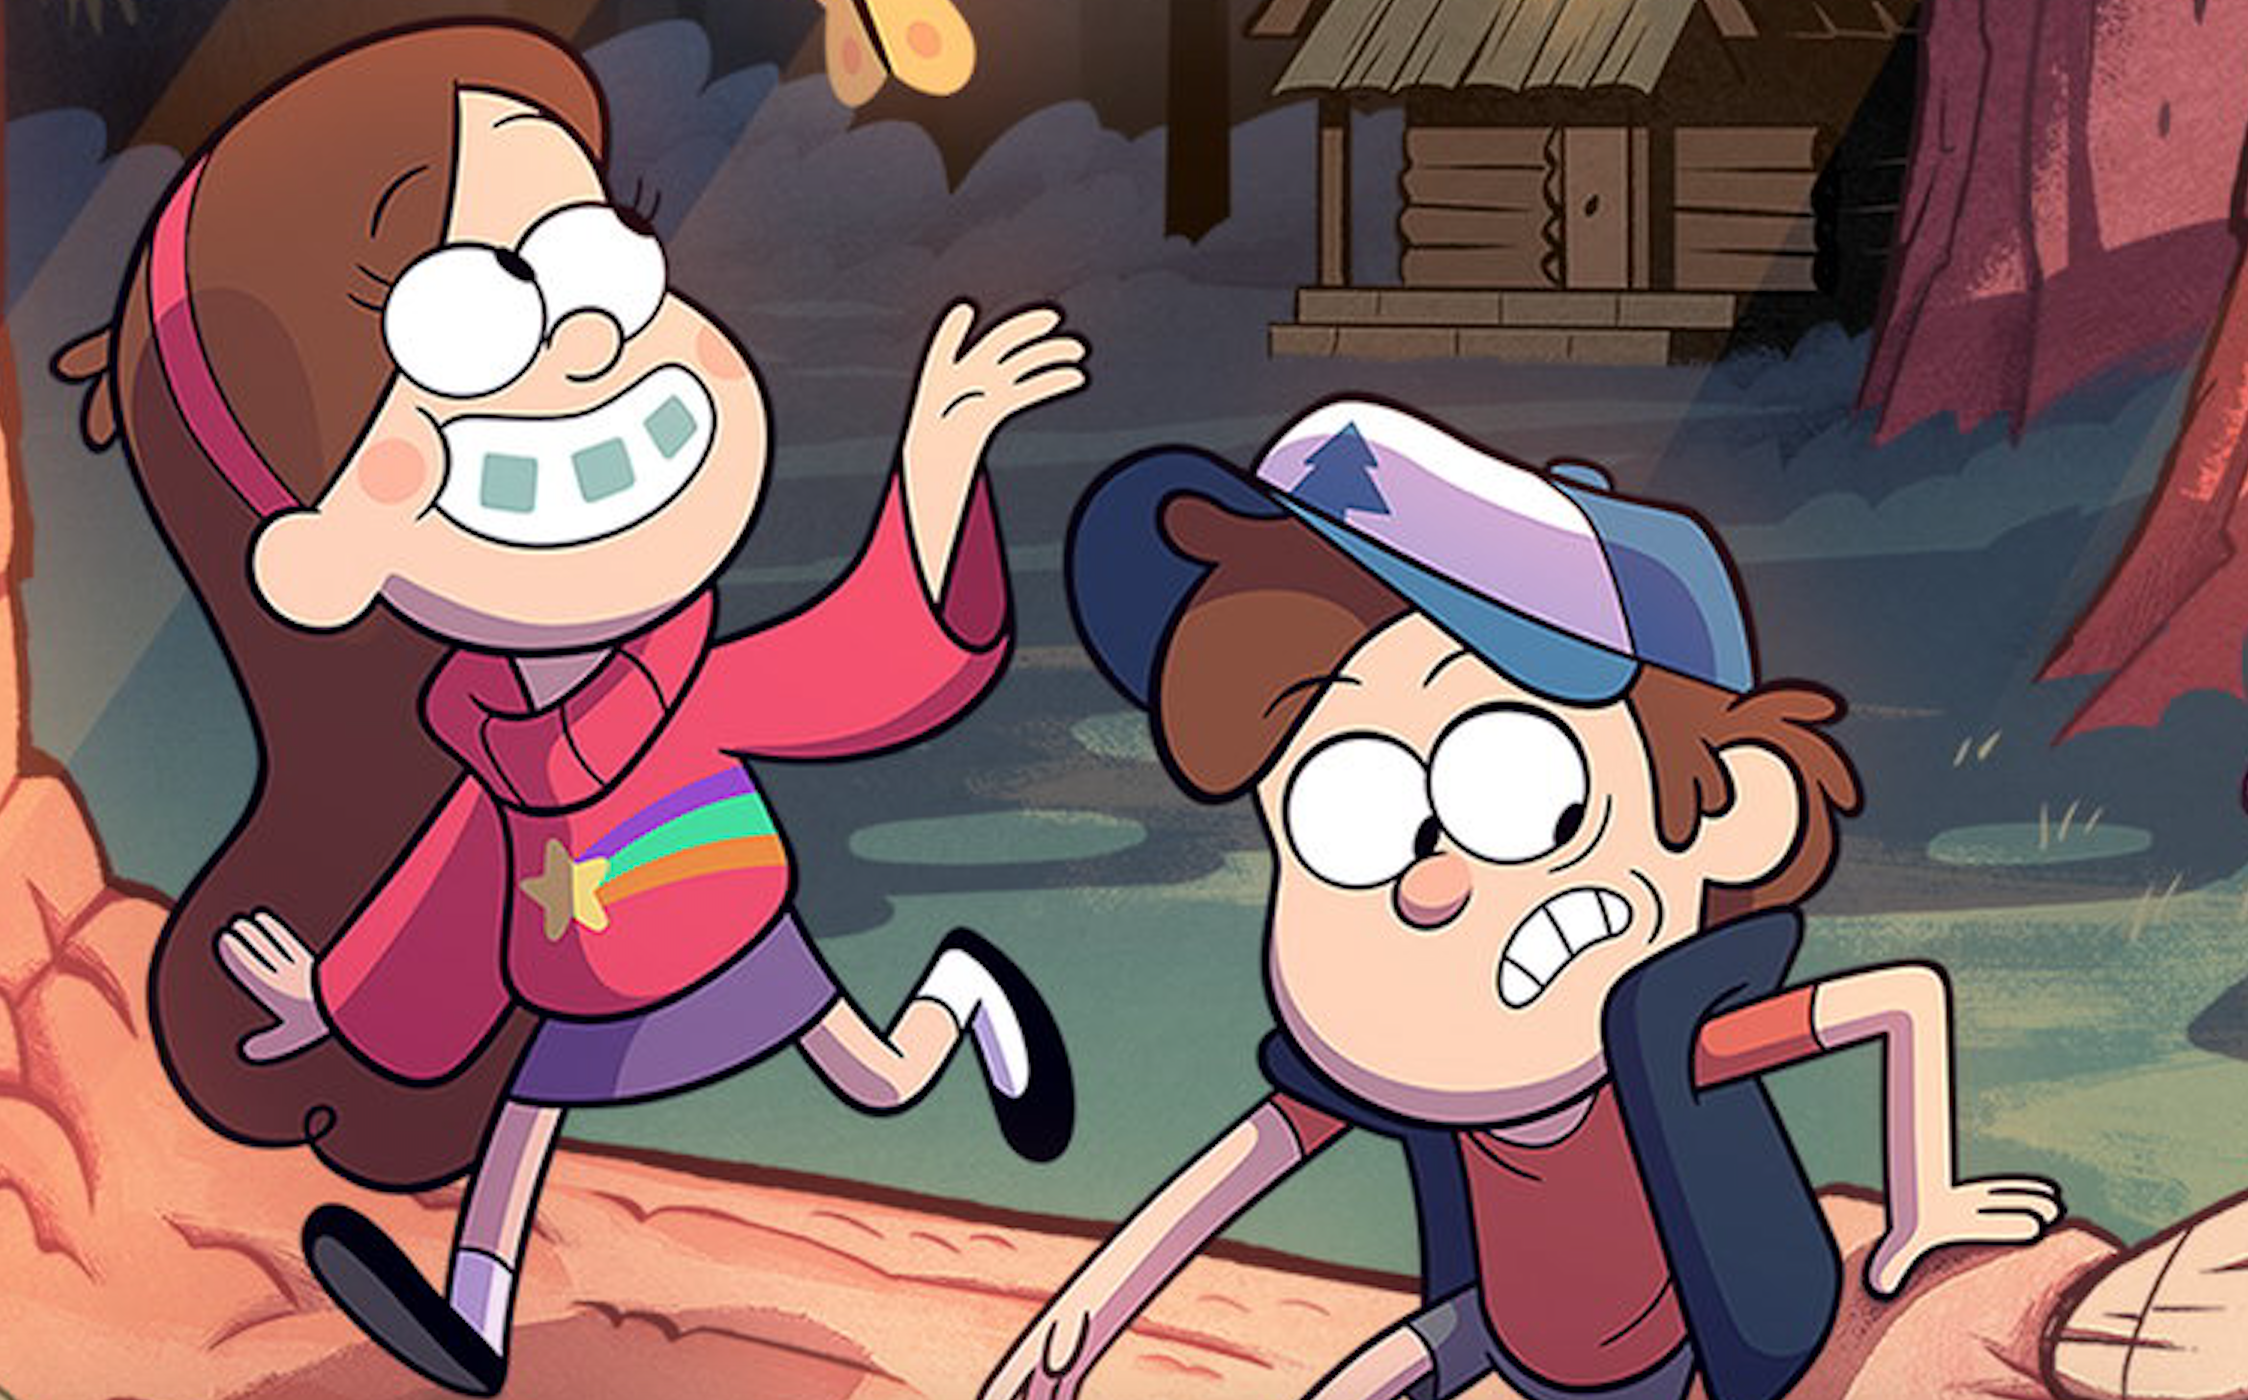 Gravity Falls Finally Comes to DVD/Blu-ray | Den of Geek